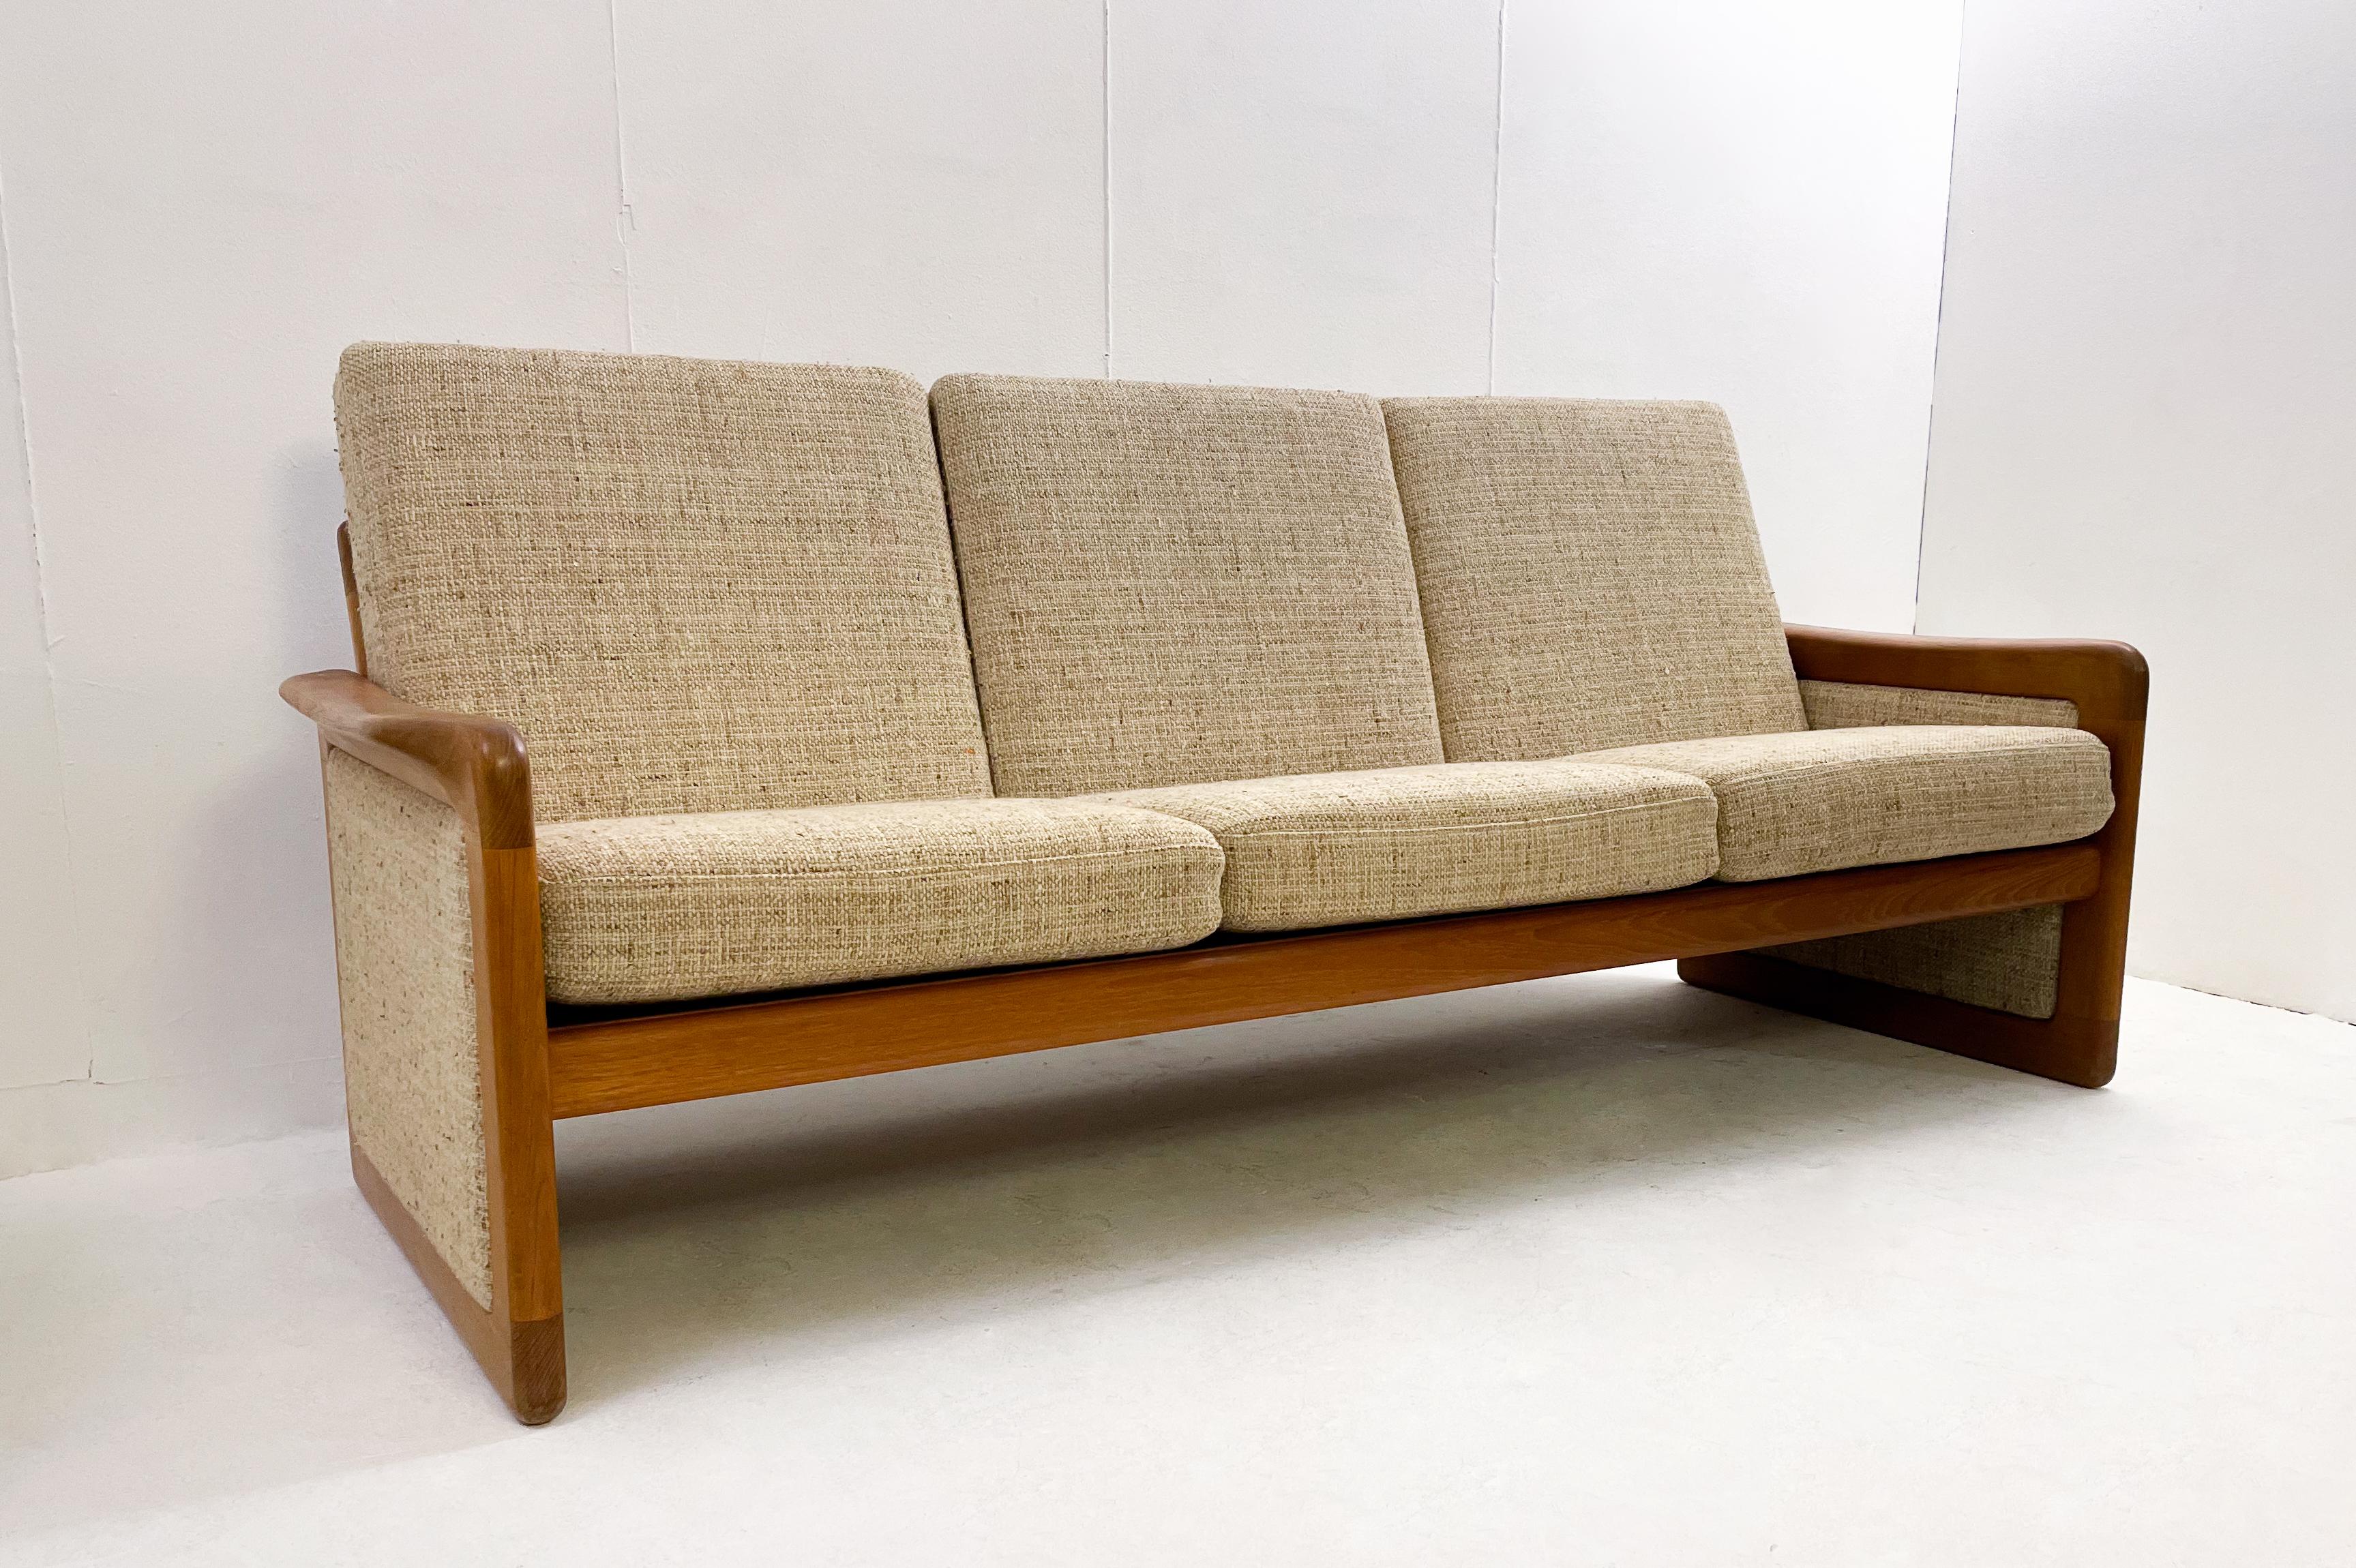 Mid-20th Century Mid-Century Teck and Beige Wool Cushions Sofa by Dyrlund, 1960s For Sale